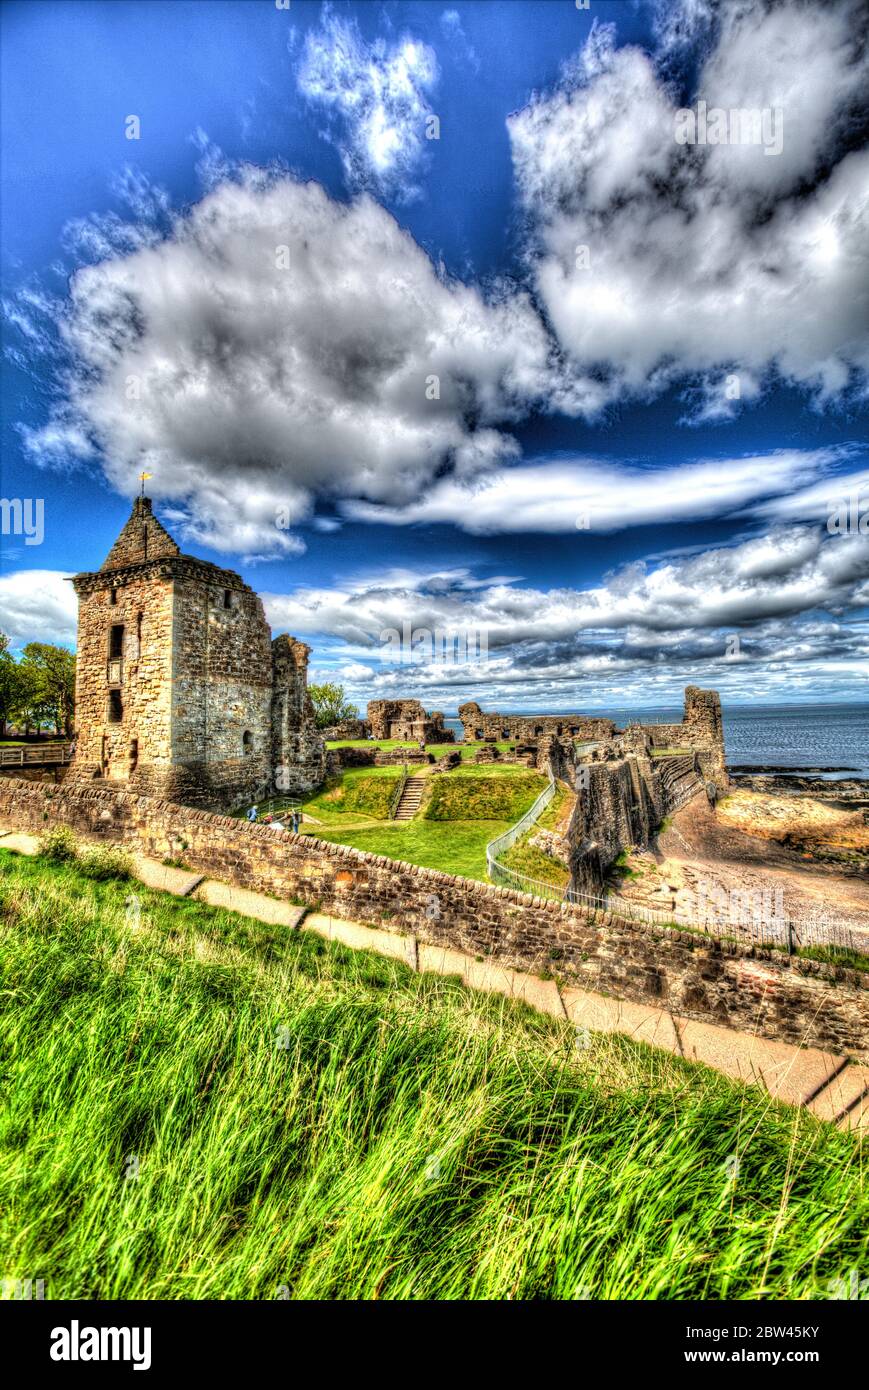 Town of St Andrews, Scotland. Artistic view of the historic St Andrews Castle ruins, which overlooks Castle Sands and the North Sea. Stock Photo